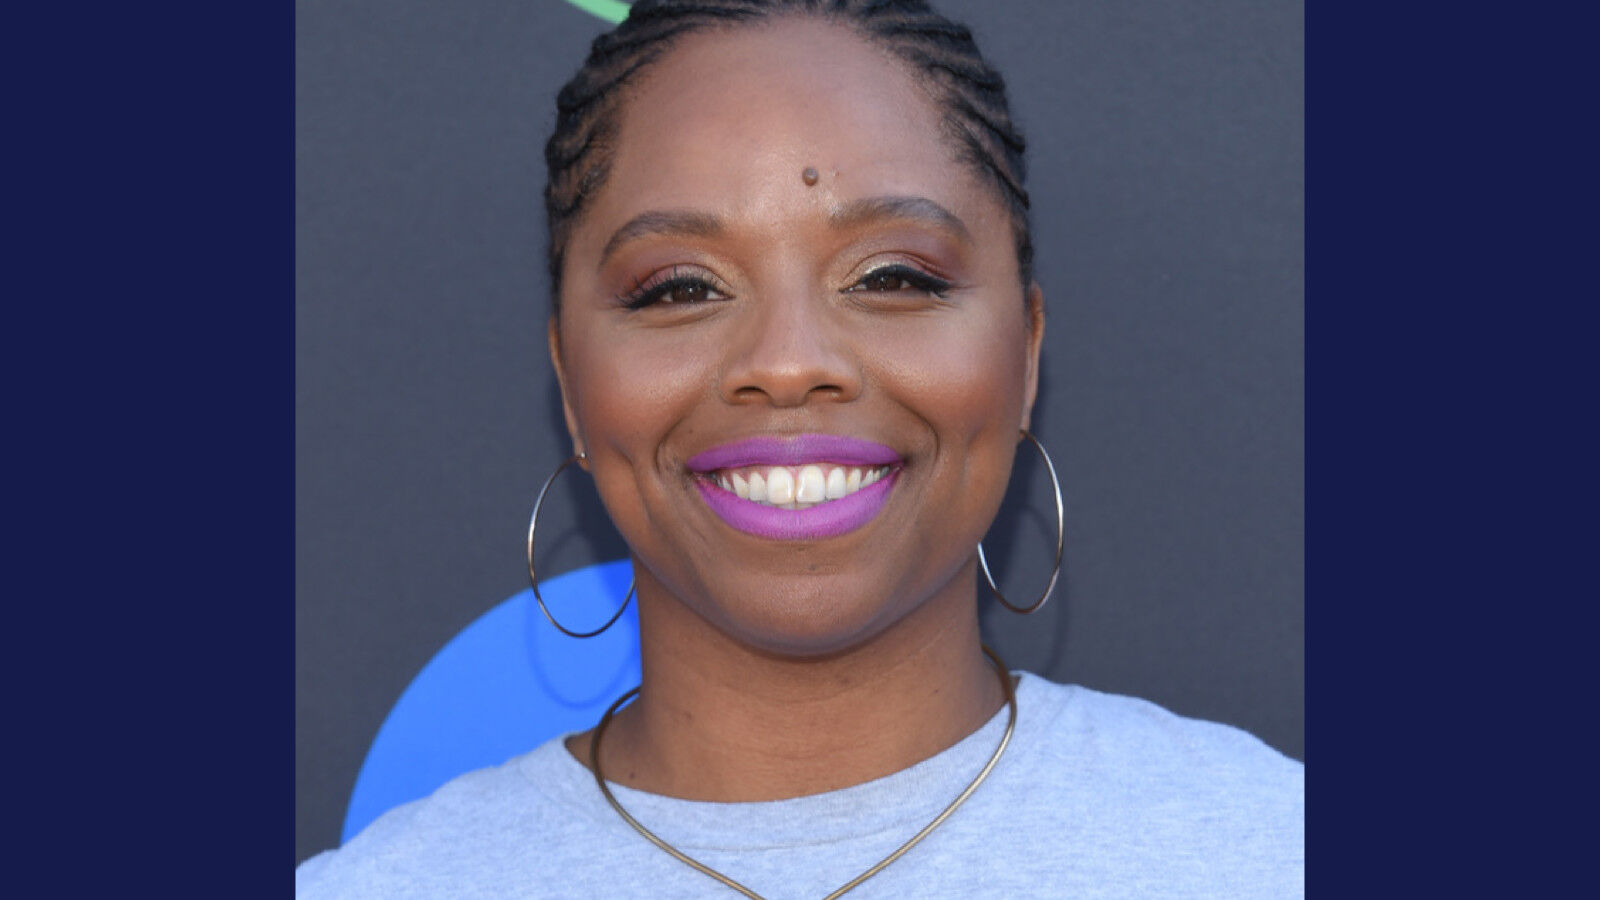 Patrisse Cullors arrives for the 2nd Annual Freeform Summit on March 27, 2019 in Hollywood, CA D